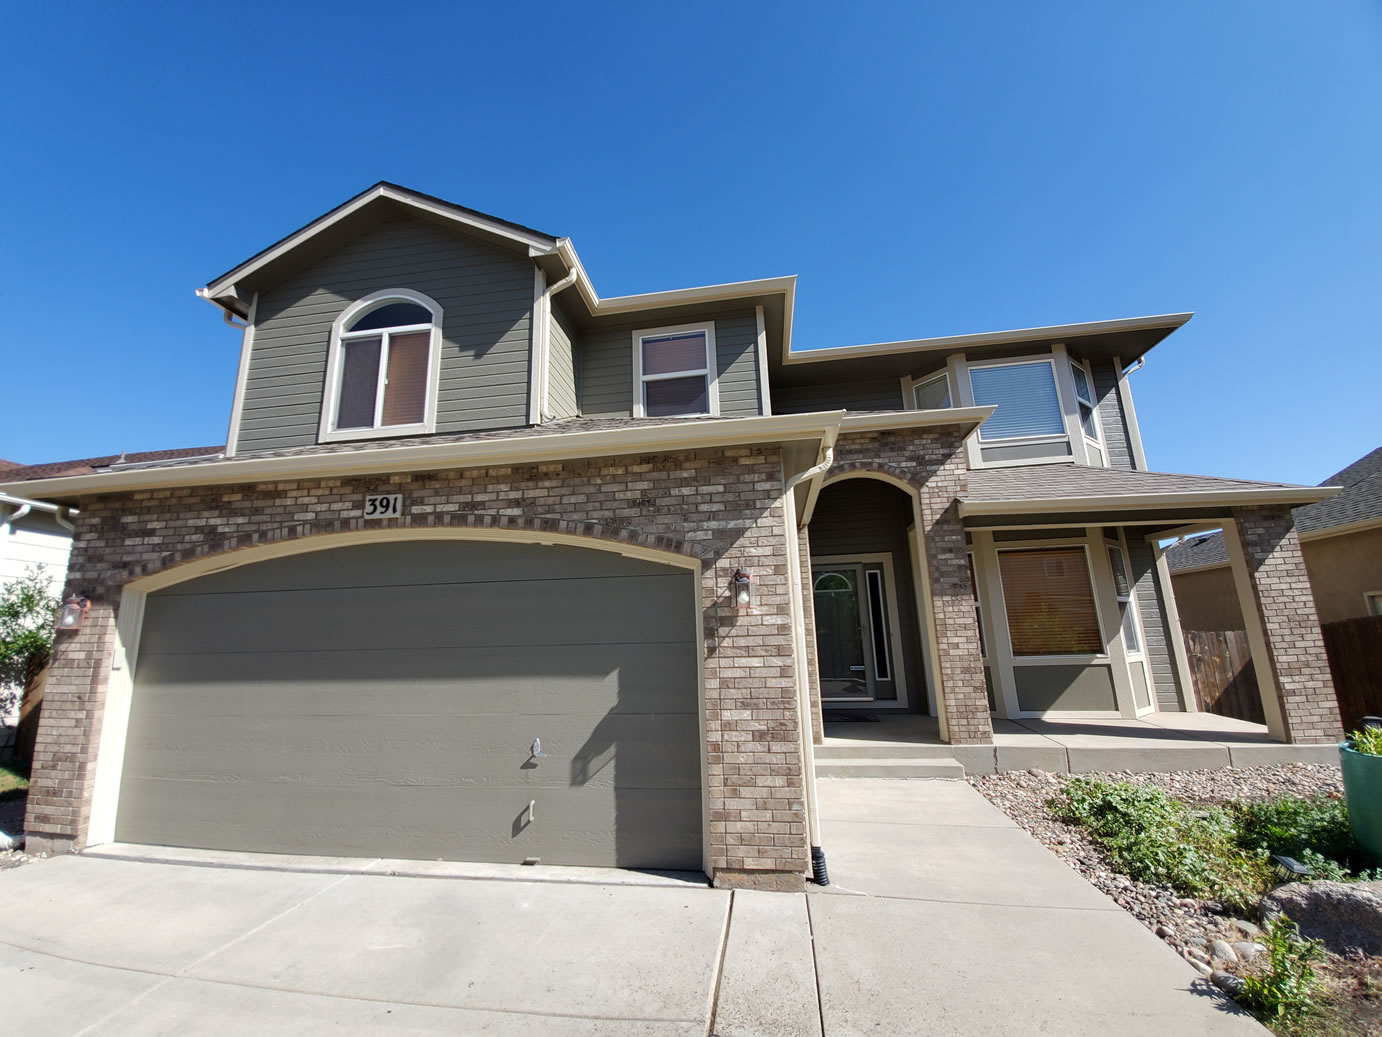 Photo: Colorado Springs House for Rent - $2150.00 / month; 3 Bd & 3 Ba